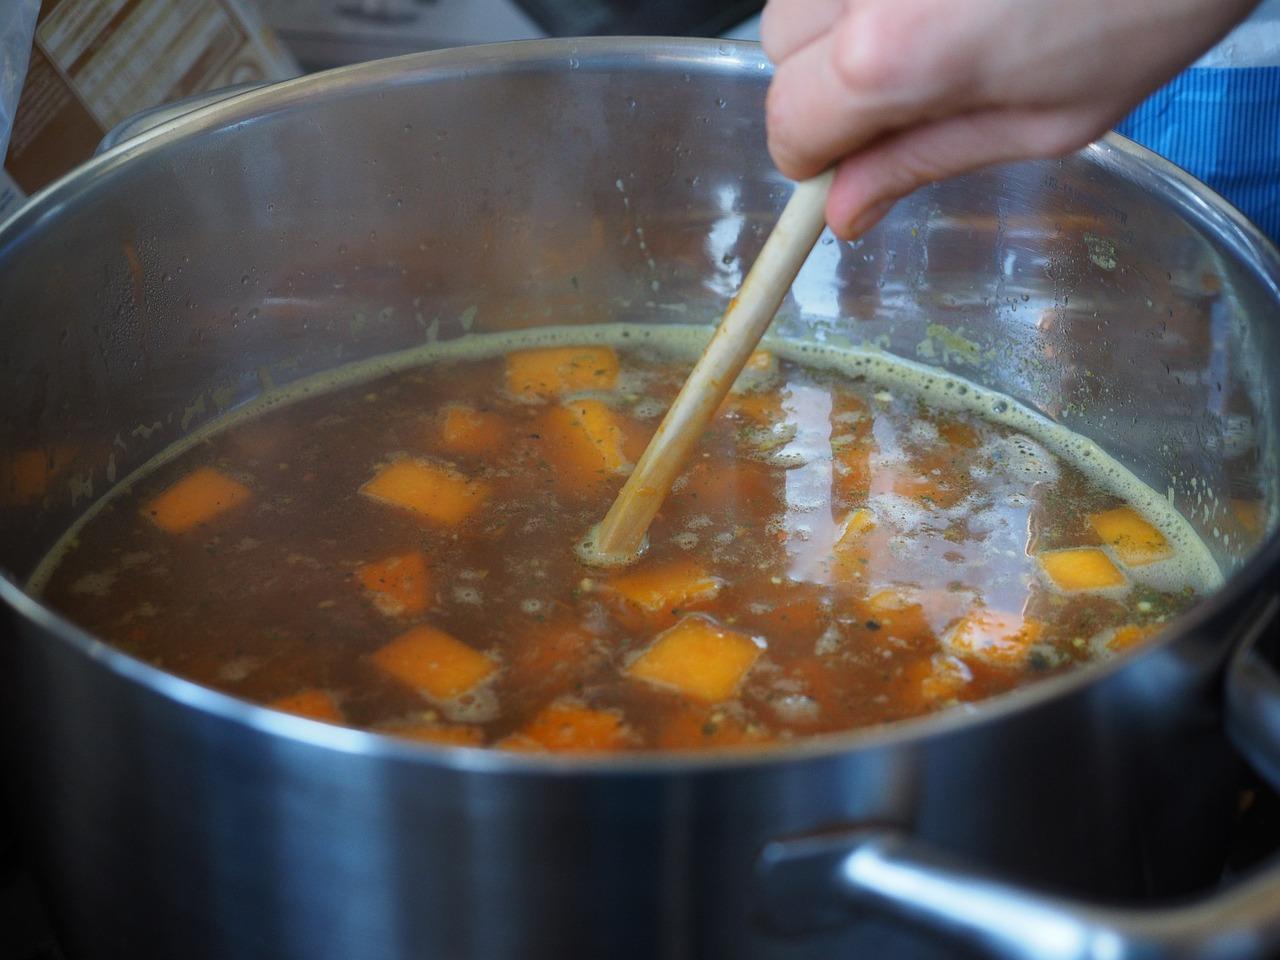 How to cook beef broth at home